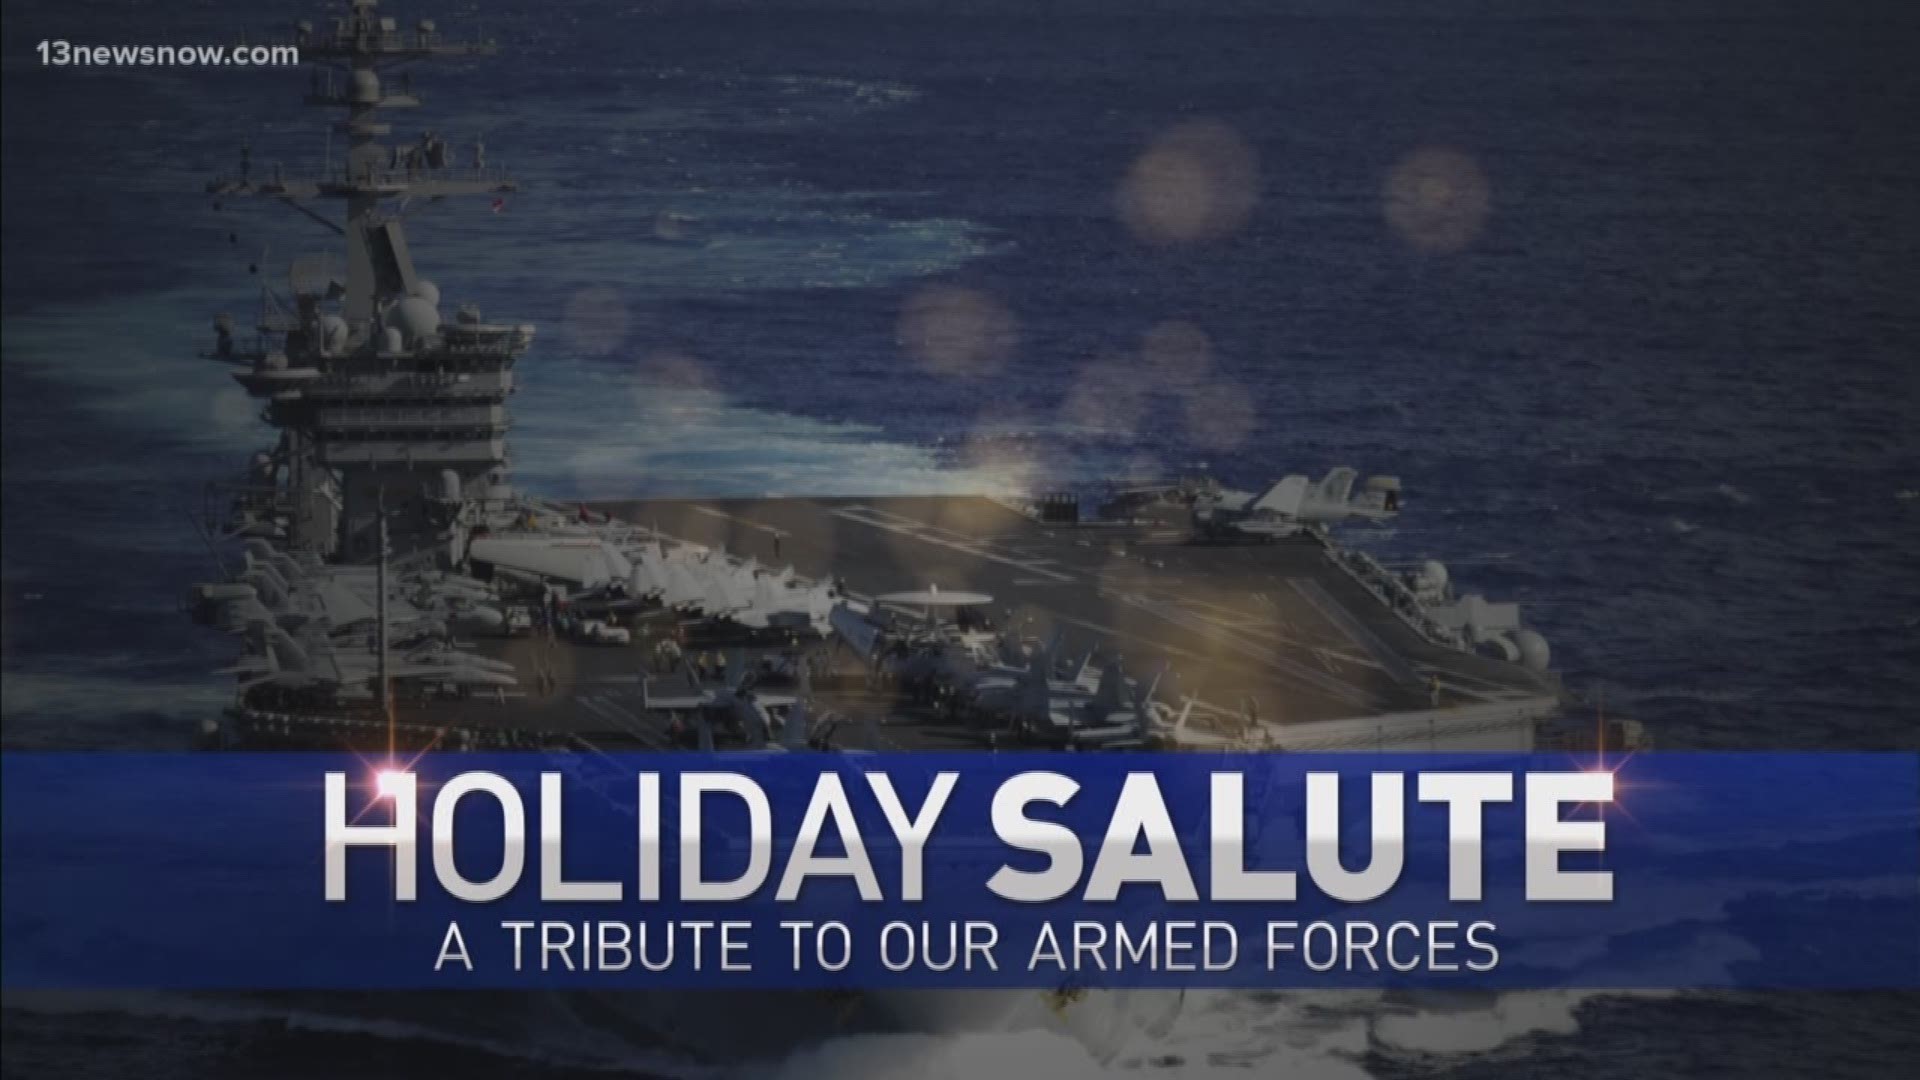 Part 2: 32nd Annual Holiday Salute